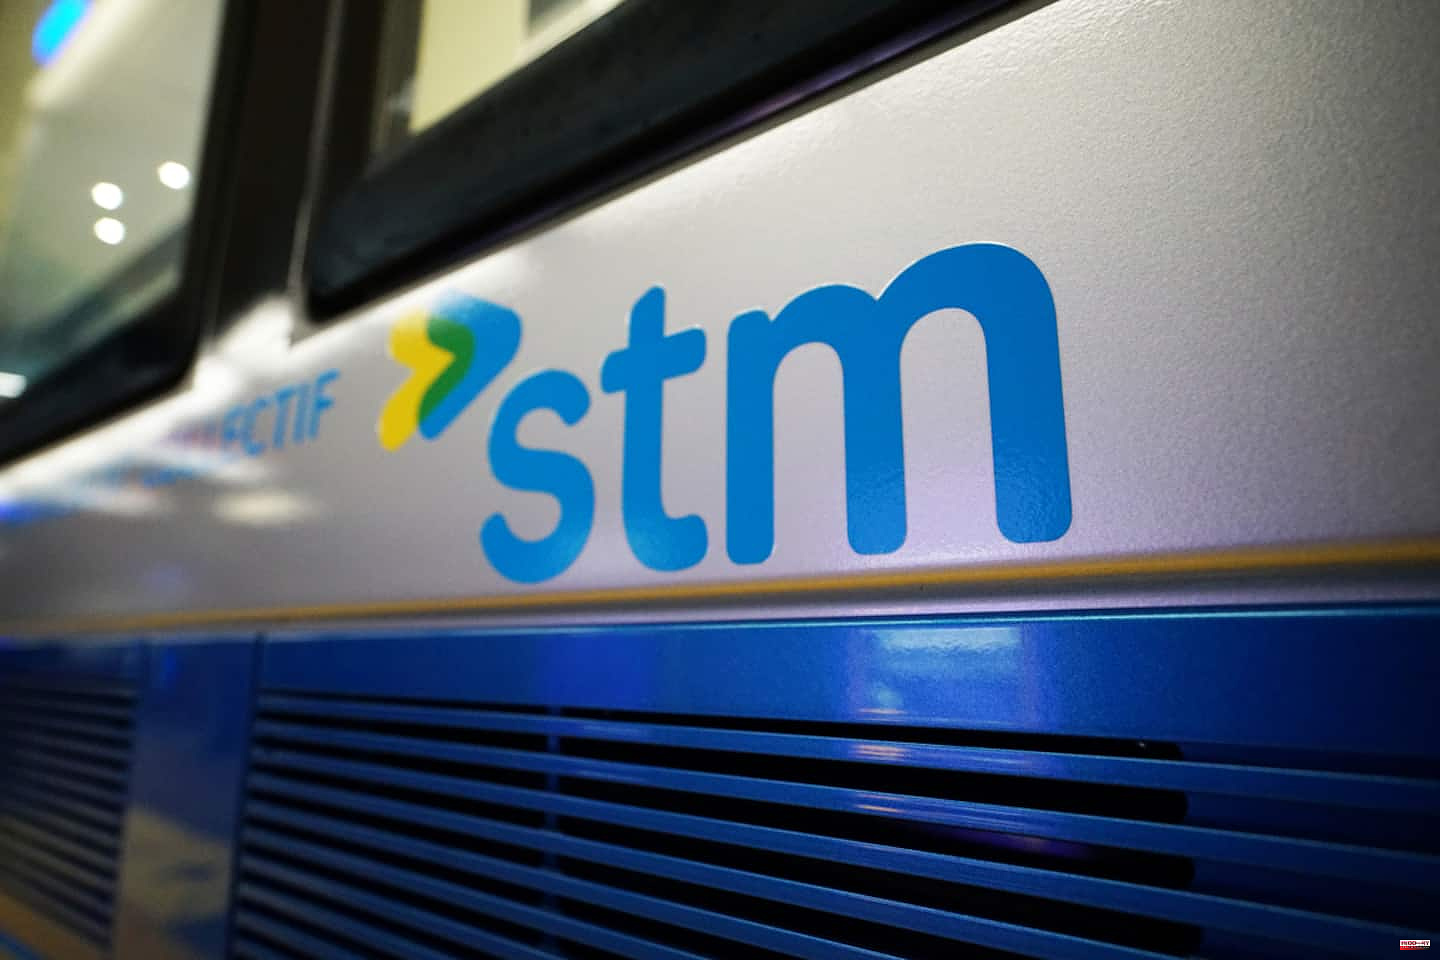 More problematic contracts at the STM